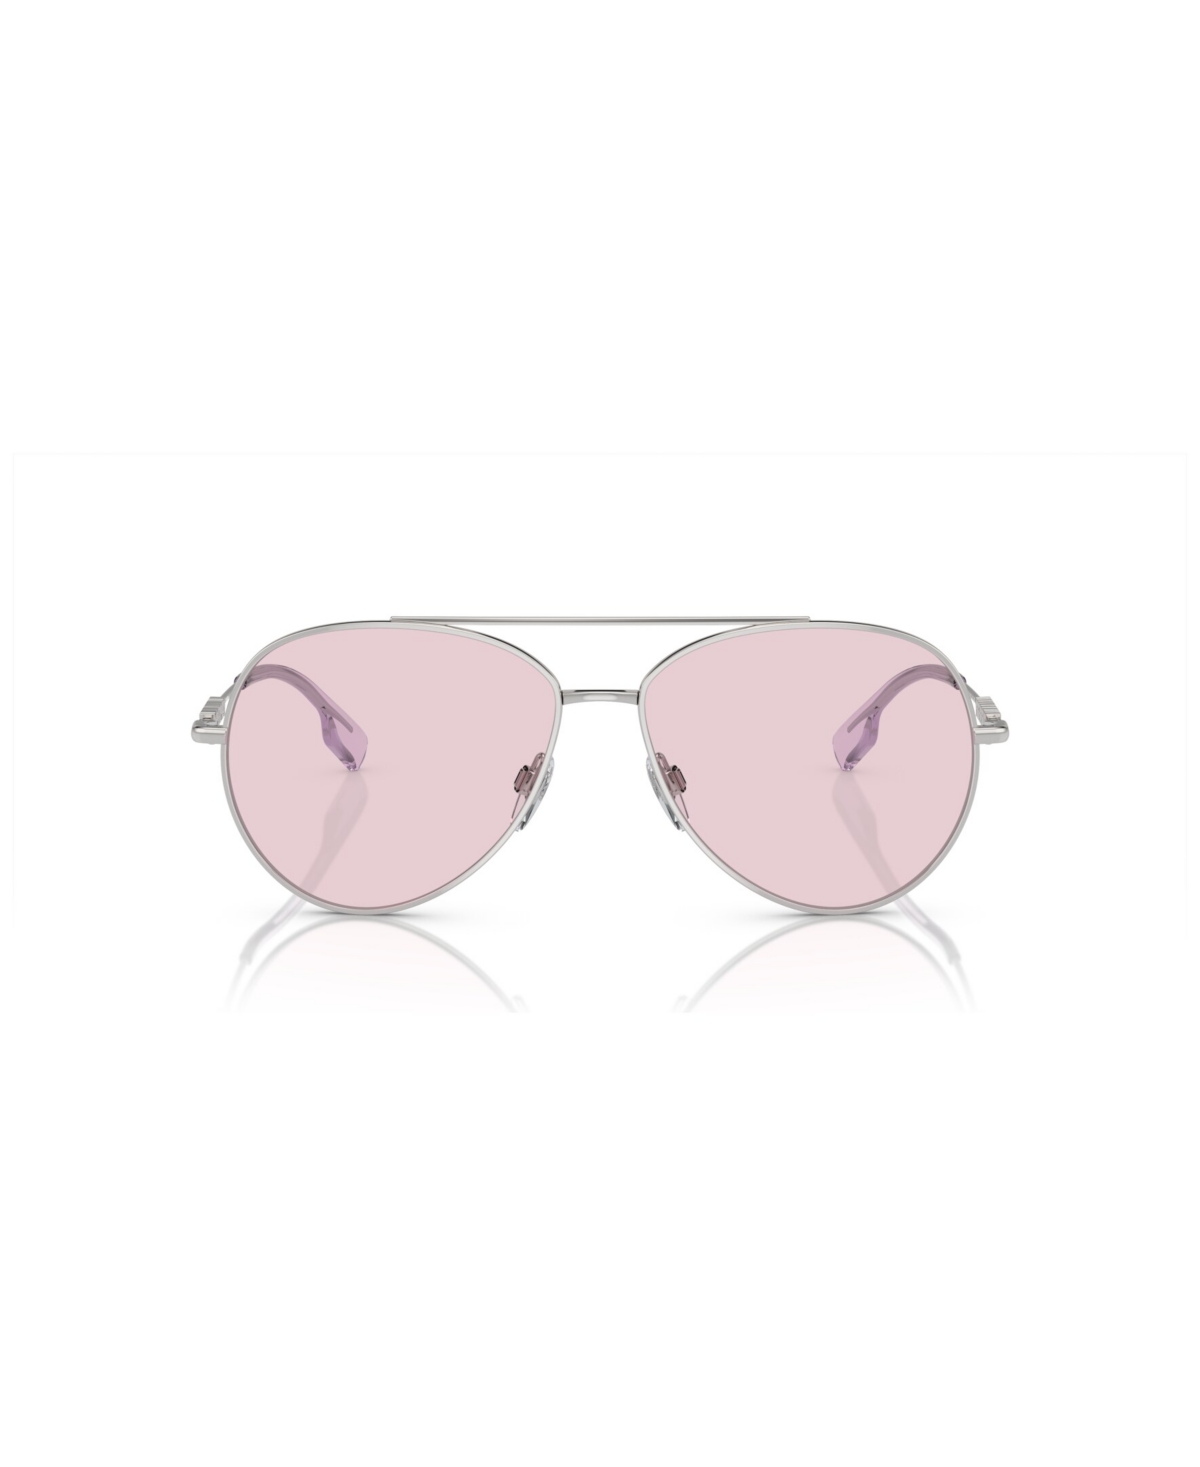 Shop Burberry Women's Sunglasses, Photocromic Be3147 In Silver